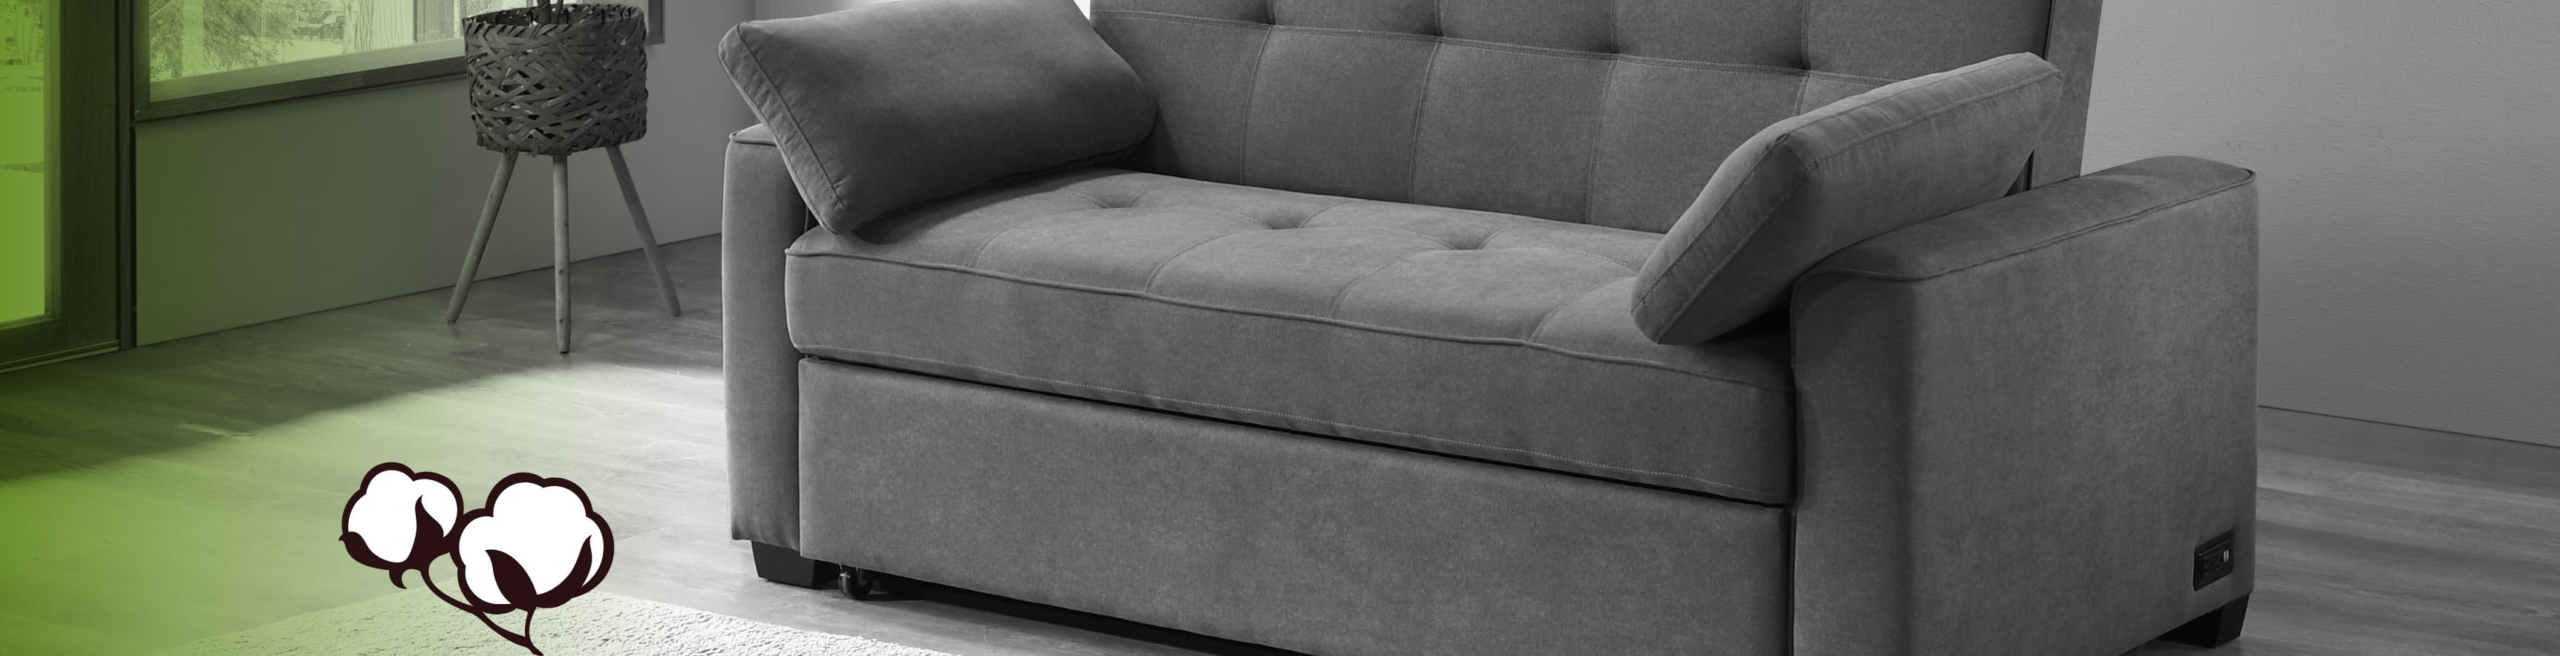 Sofa Beds Other Convertible Archives Futon D Or Natural Mattresses